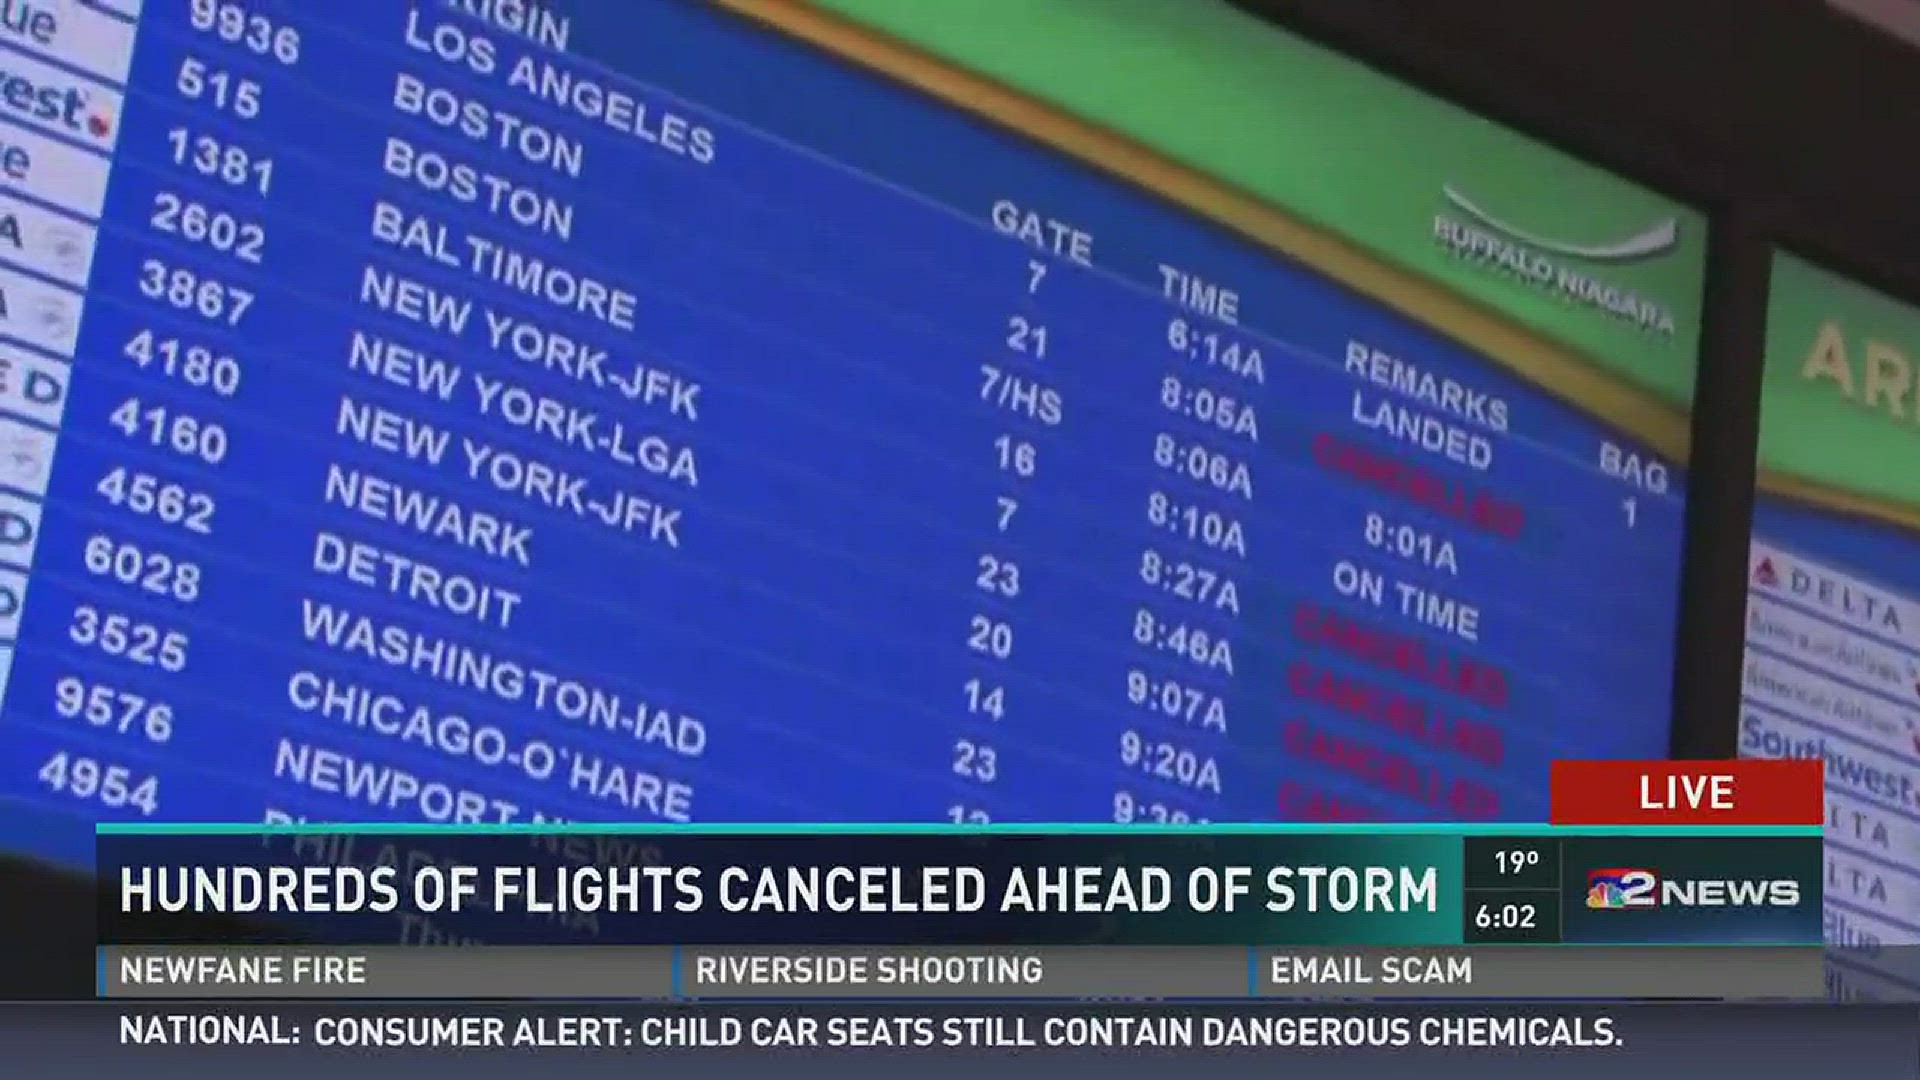 Daybreak has live team coverage on the Northeastern Storm affecting flights out of Buffalo.